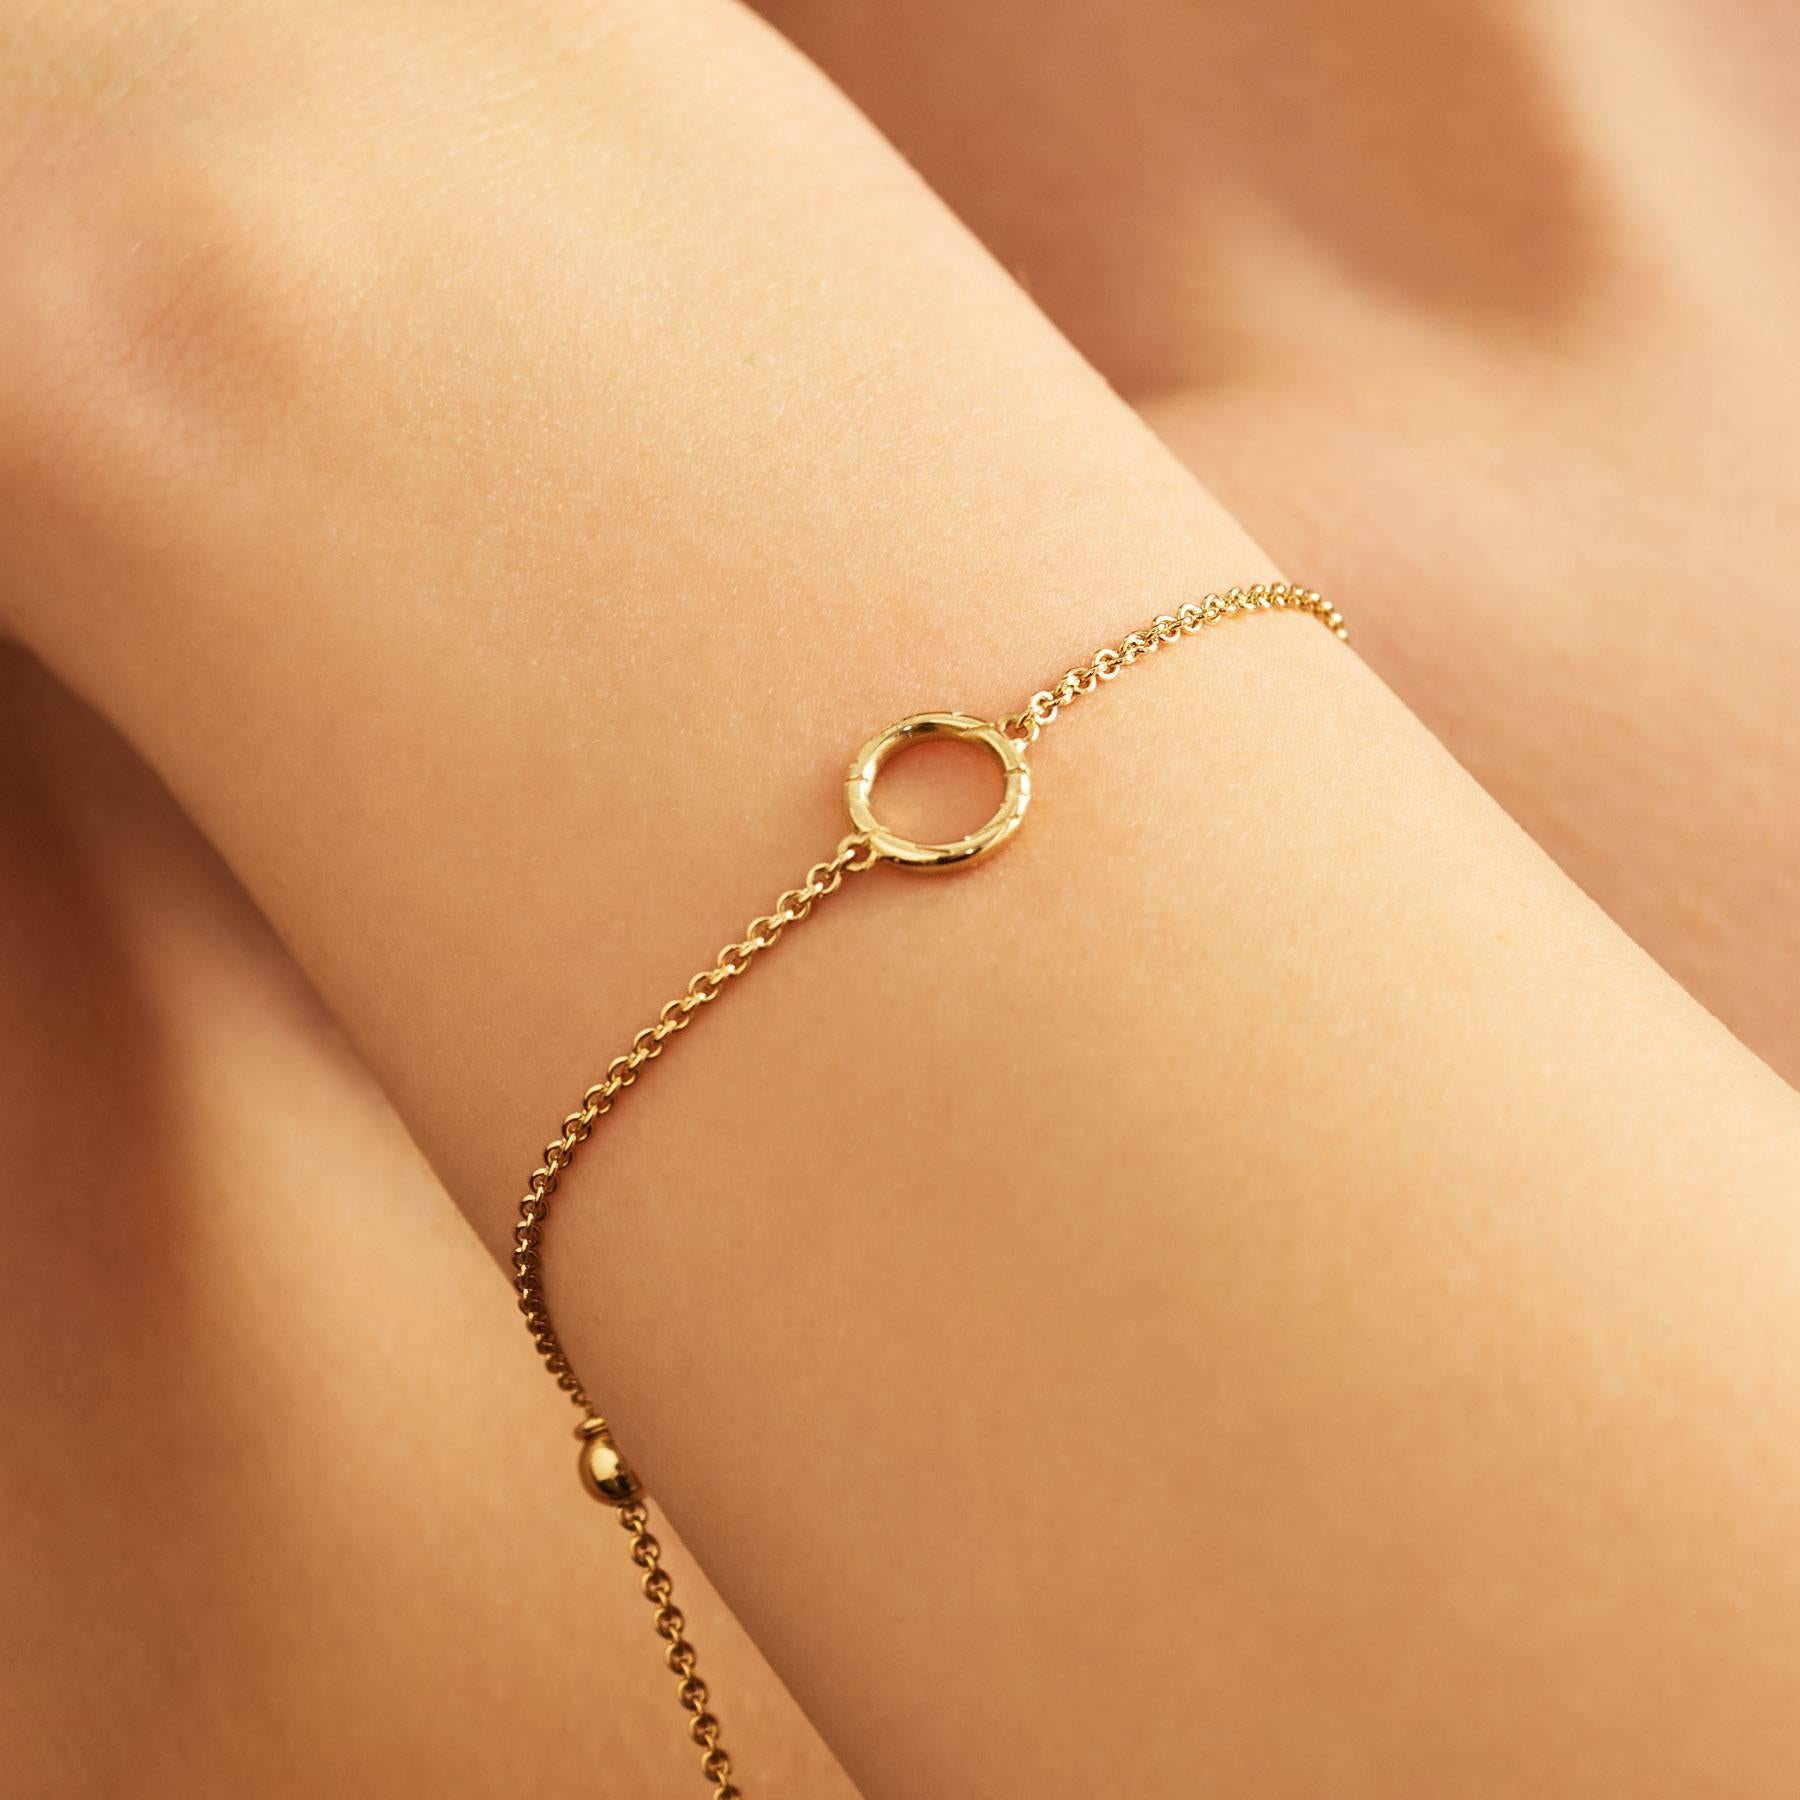 18ct yellow gold with fur texture engraving
Fully adjustable length chain
Circle diameter measuring 9mm
Made in London

A delicate bracelet that works perfectly with any outfit and can be worn on its own or layered with other bracelets form the